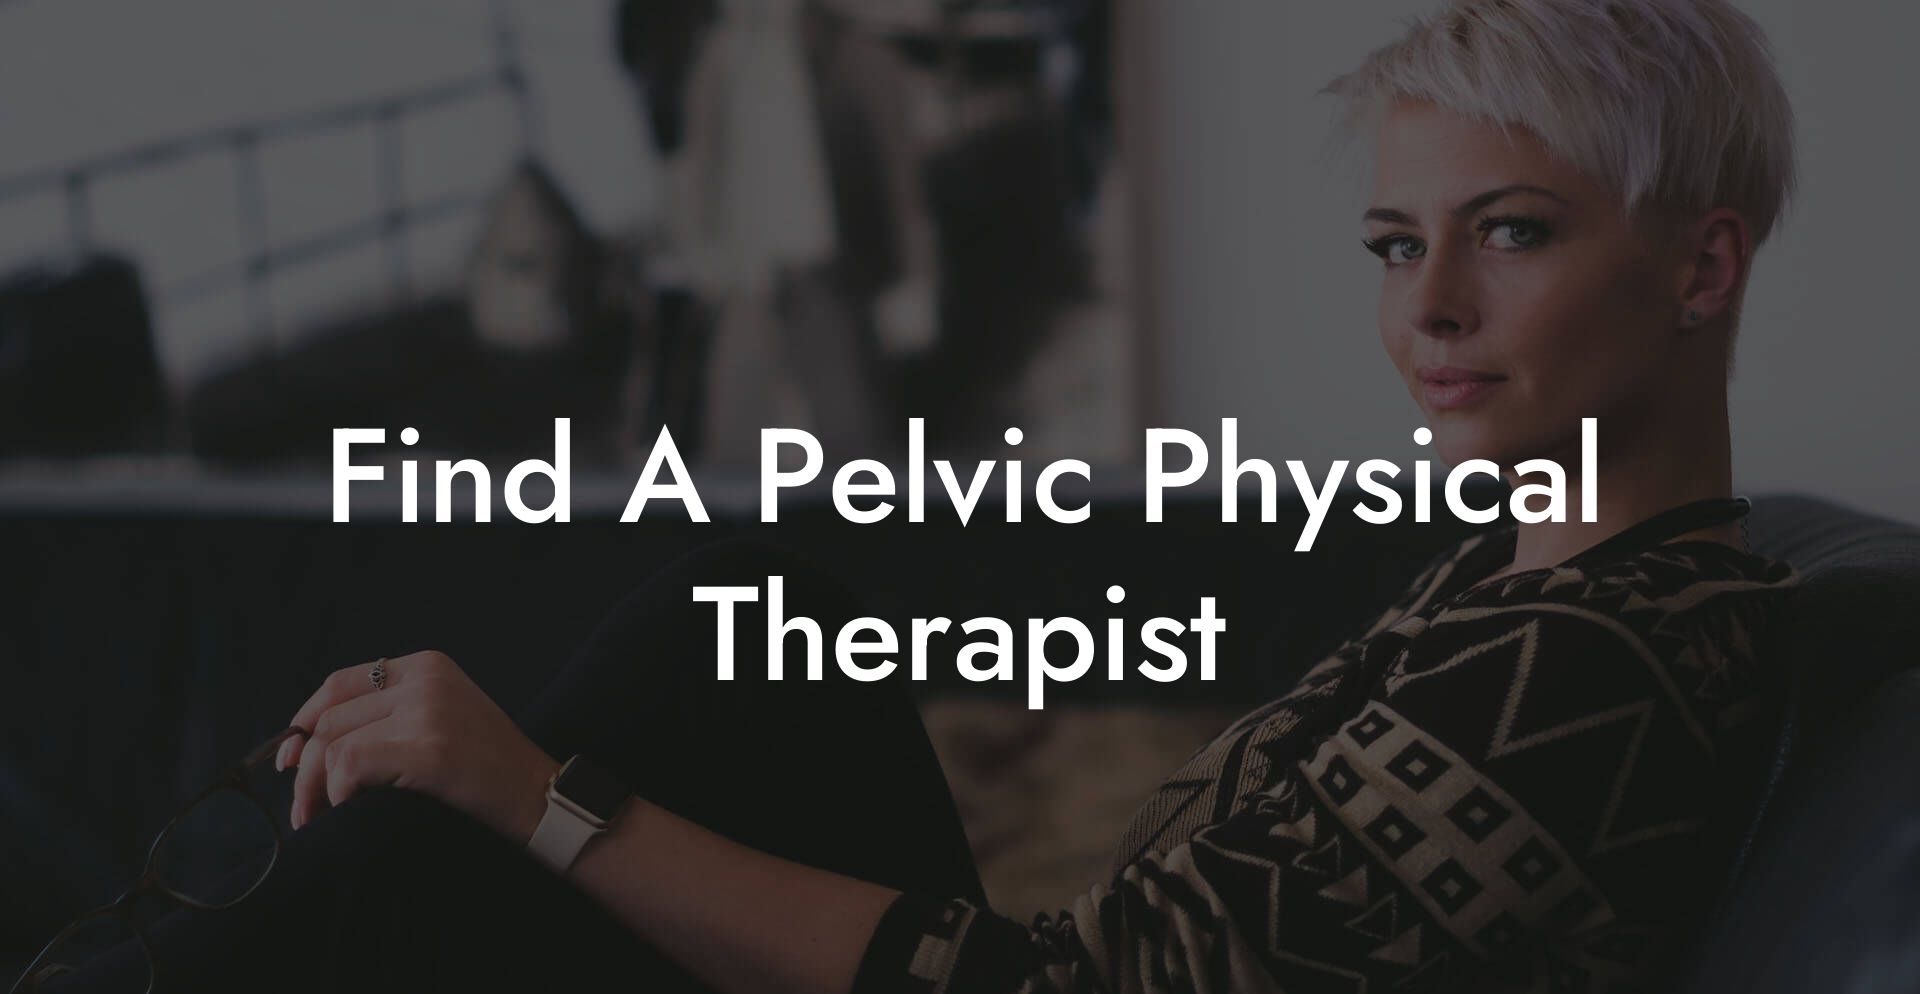 Find A Pelvic Physical Therapist